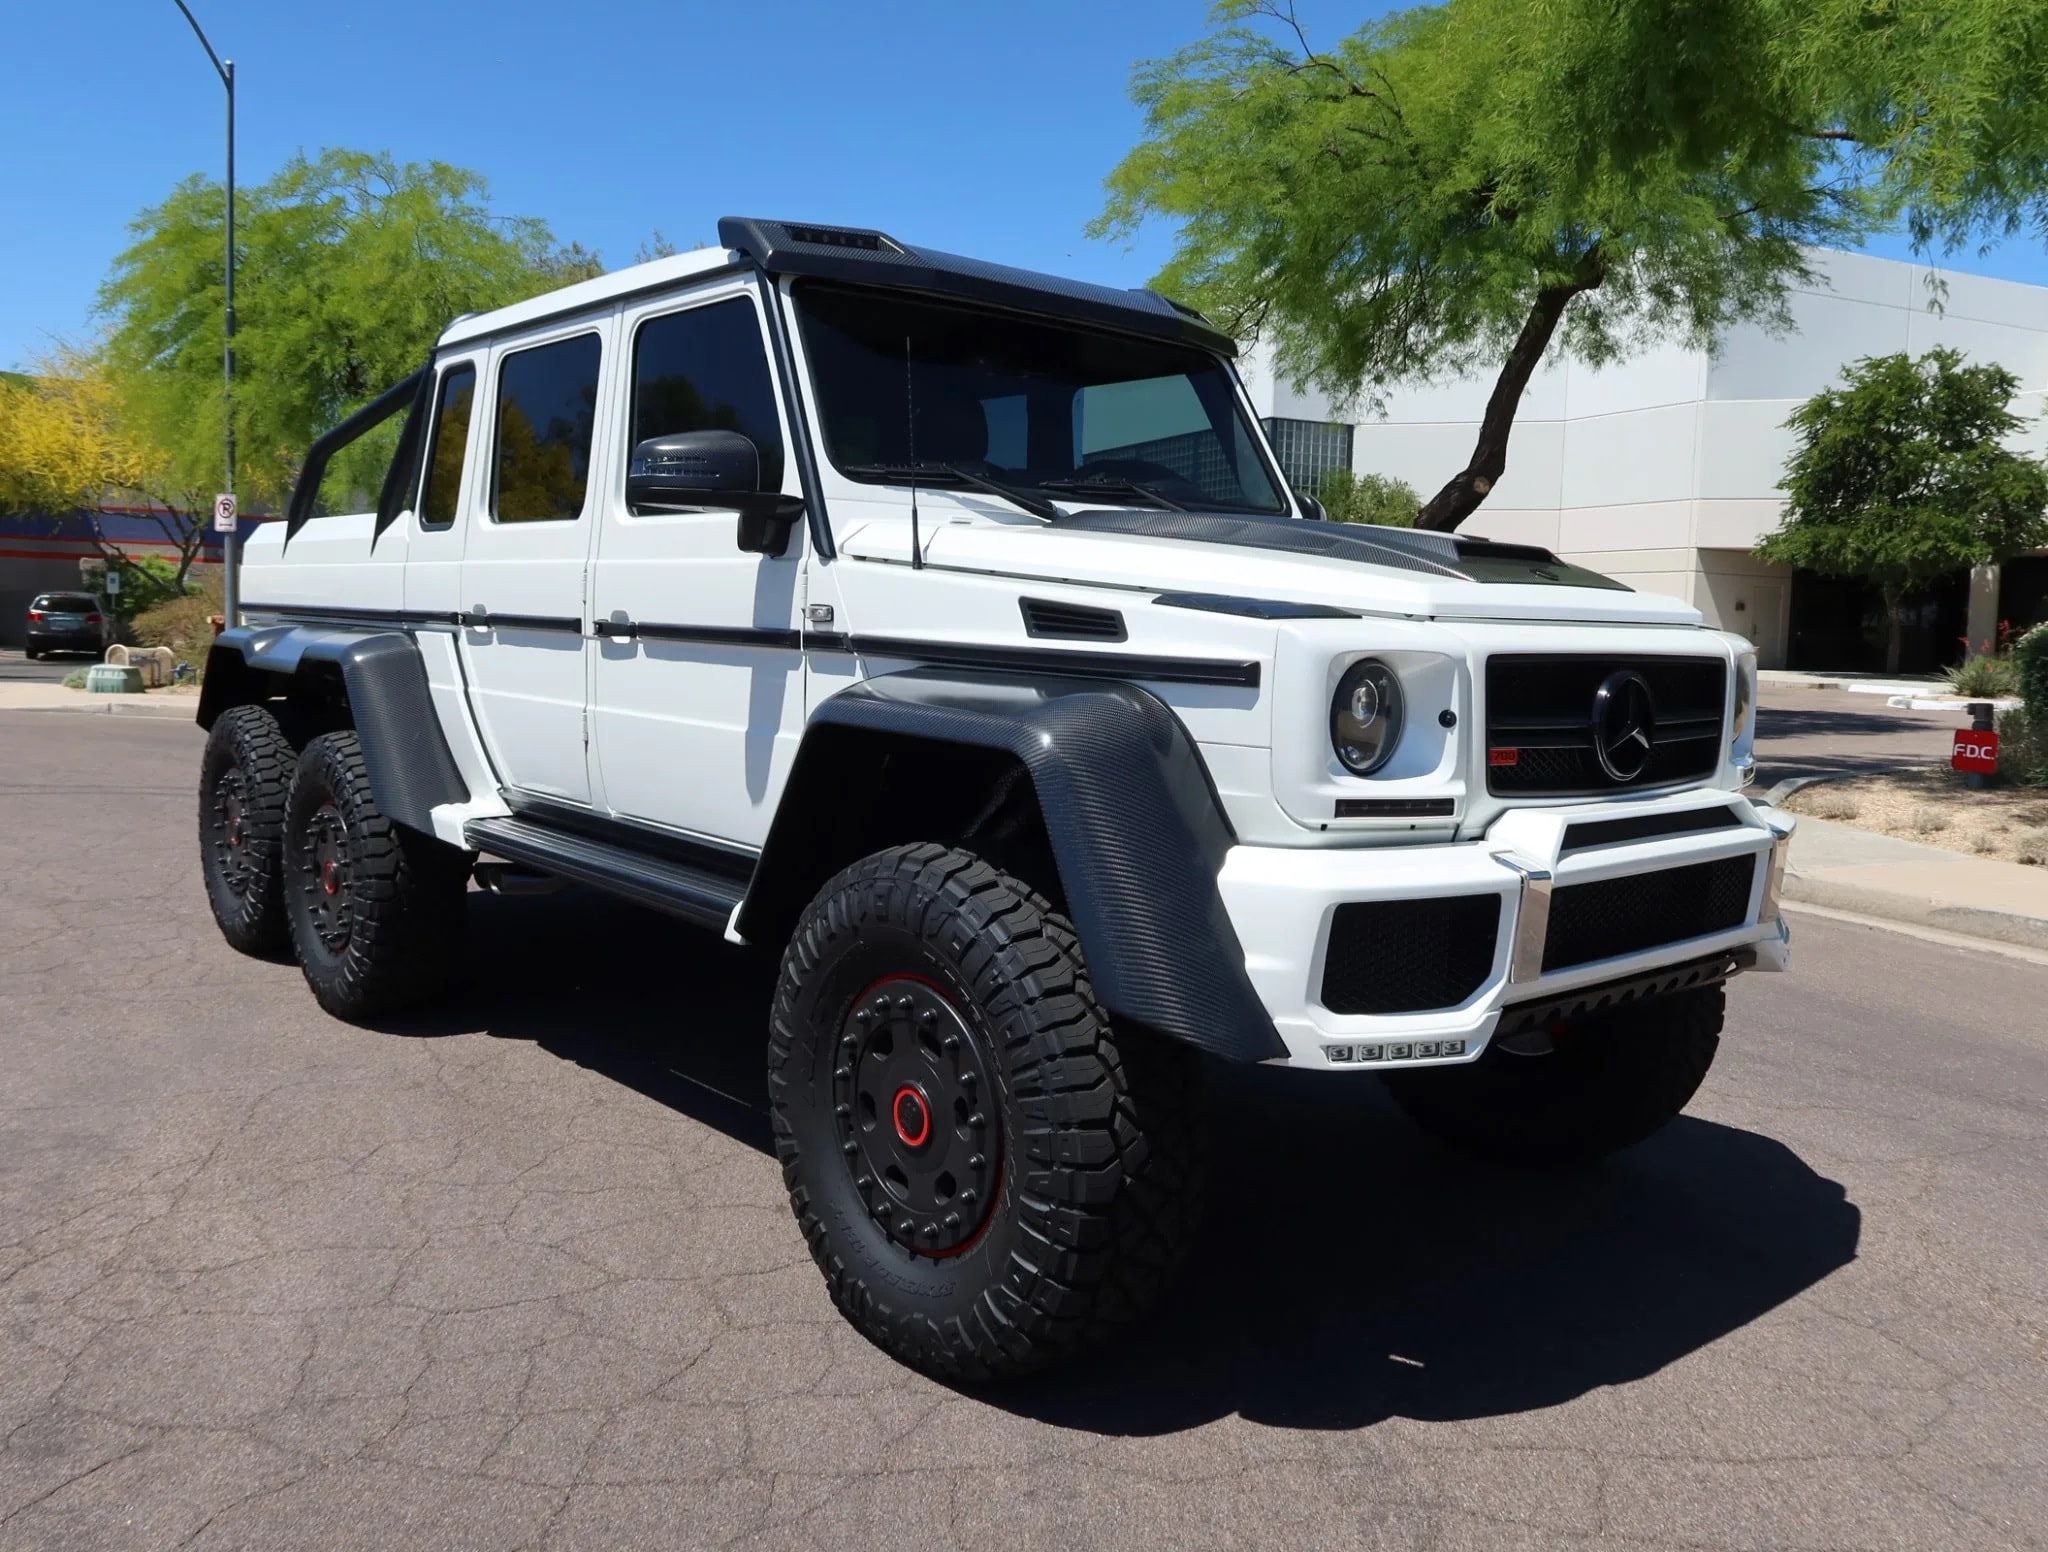 This 6x6 Mercedes Truck Sold For Over 1 1 Million The New Owner Can T Drive It Very Far Autoevolution